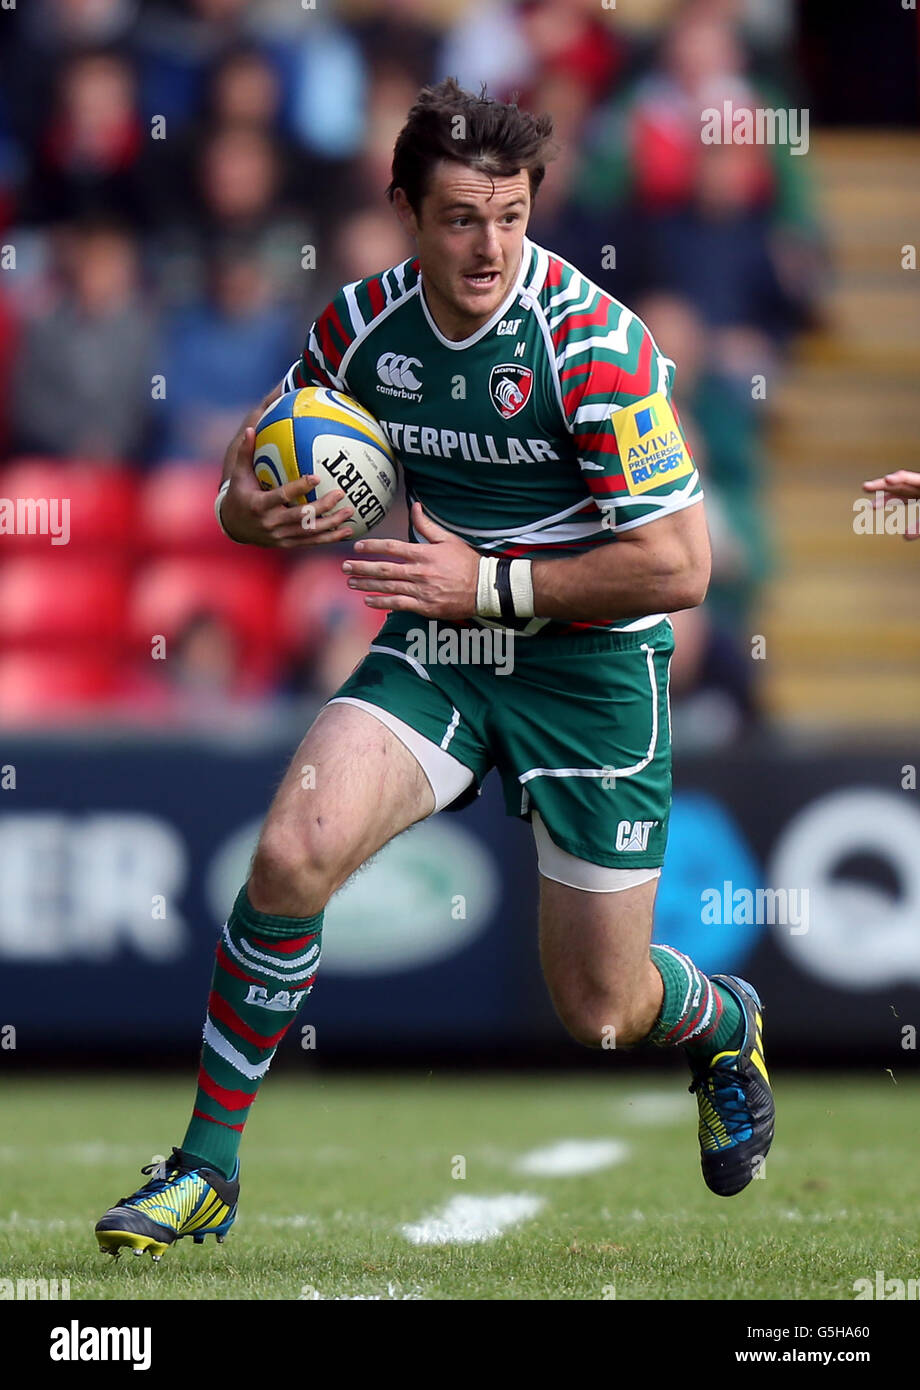 Rugby Union - Leicester Tigers v Exeter Chiefs - Welford Road. Matt Smith, Leicester  Tigers Stock Photo - Alamy